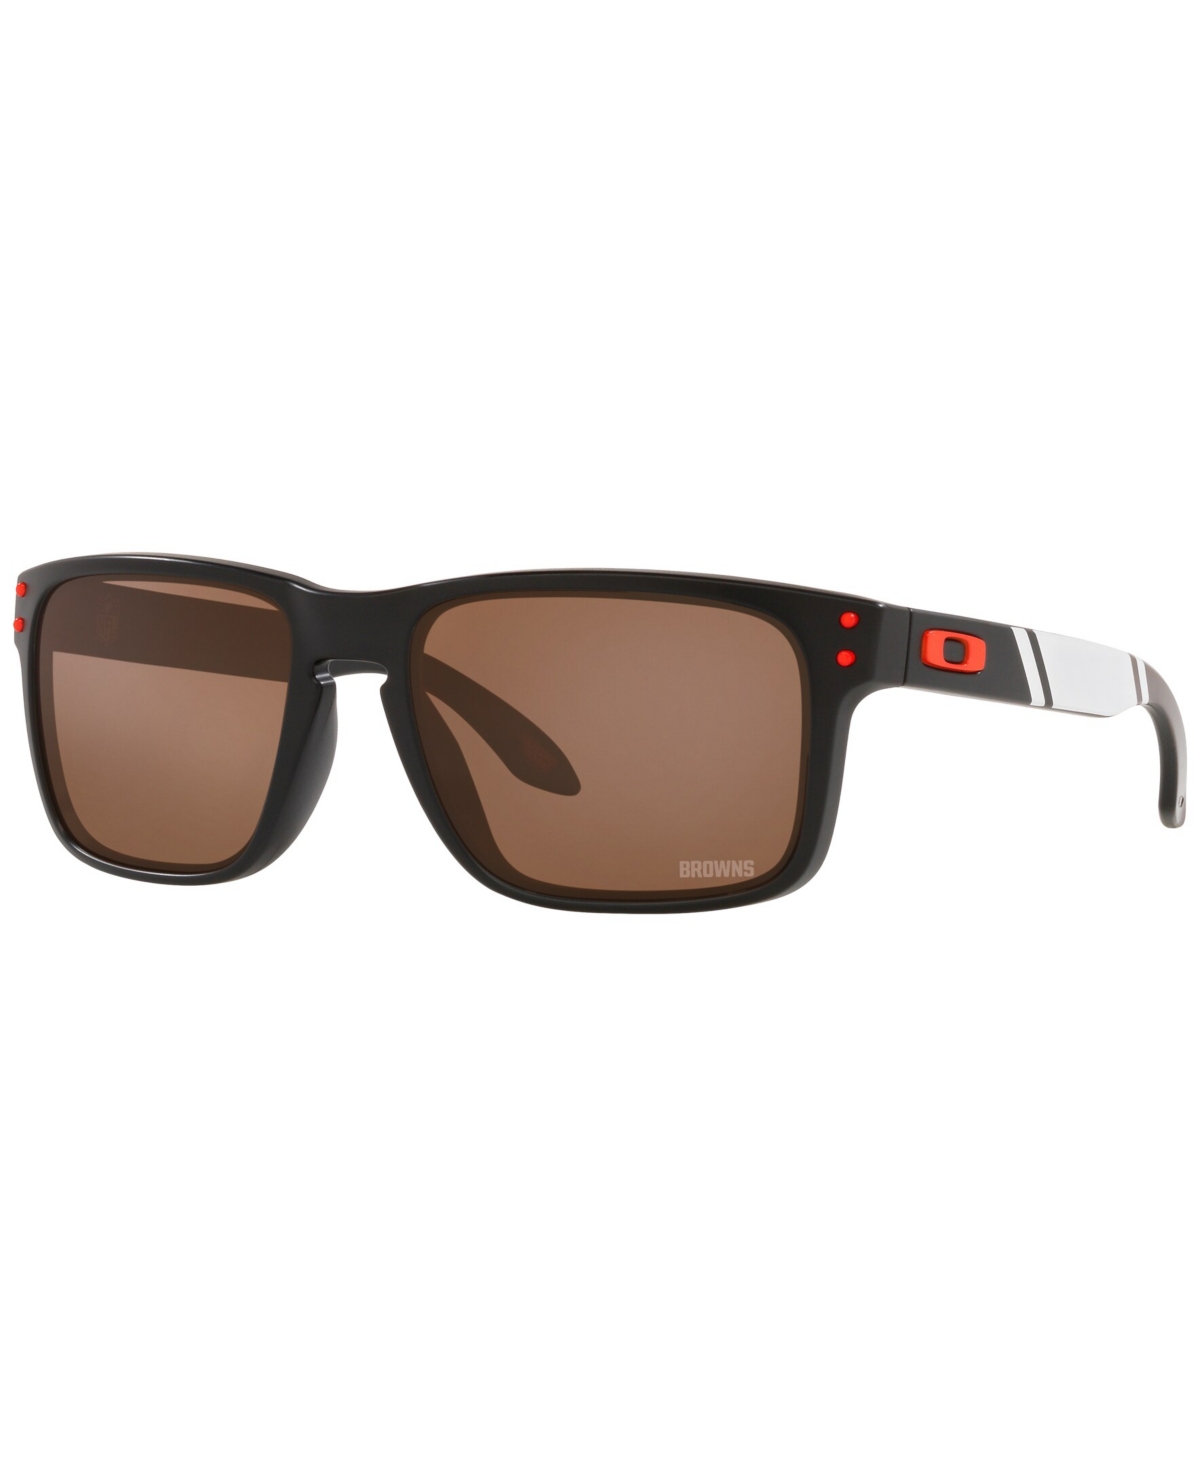 Oakley Holbrook Men's Sunglasses, Oo9102 Nfl Collection In Prizm Tungsten